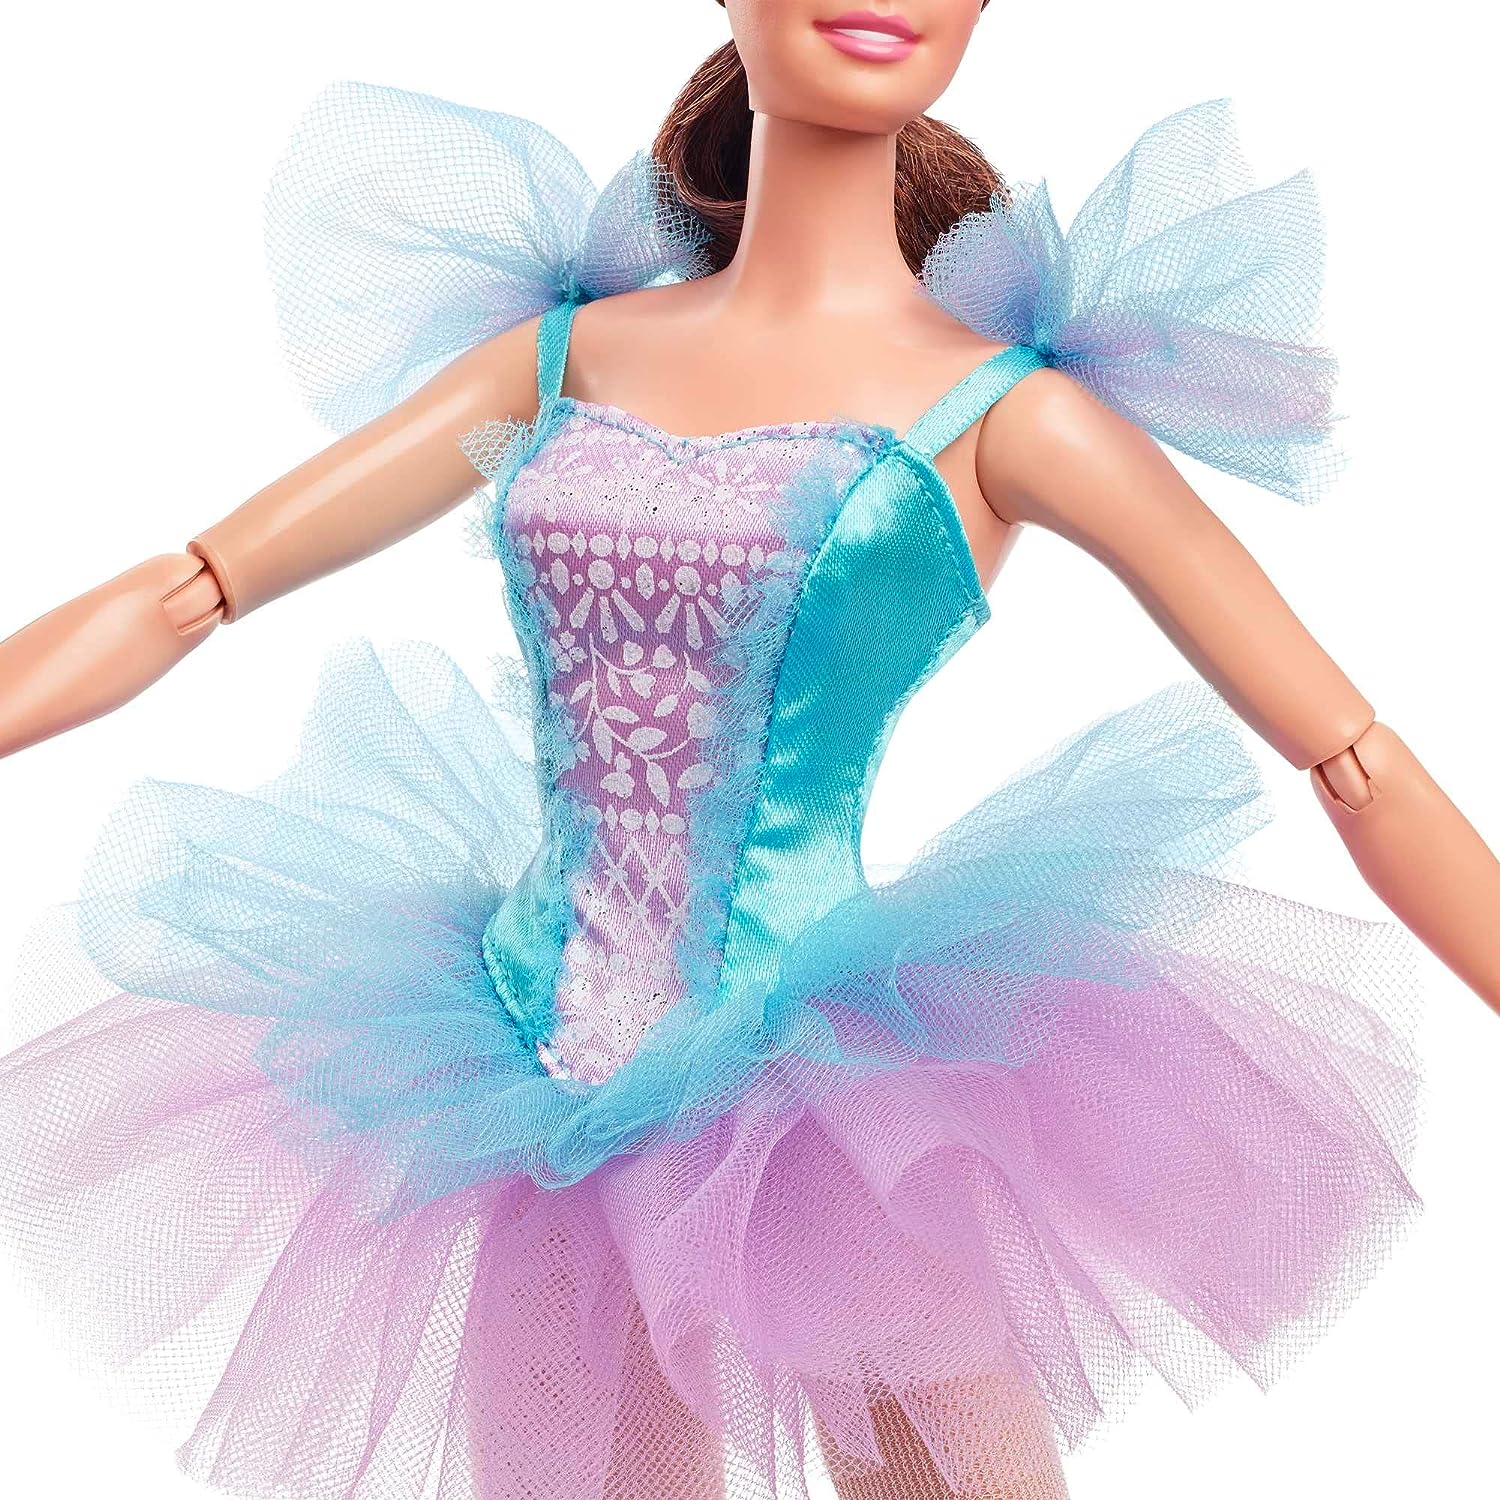 Barbie 12 Inch Signature Ballet Wishes Doll Wearing Ballerina Costume, Tutu, Pointe Shoes & Tiara for 6 Year Olds and Up